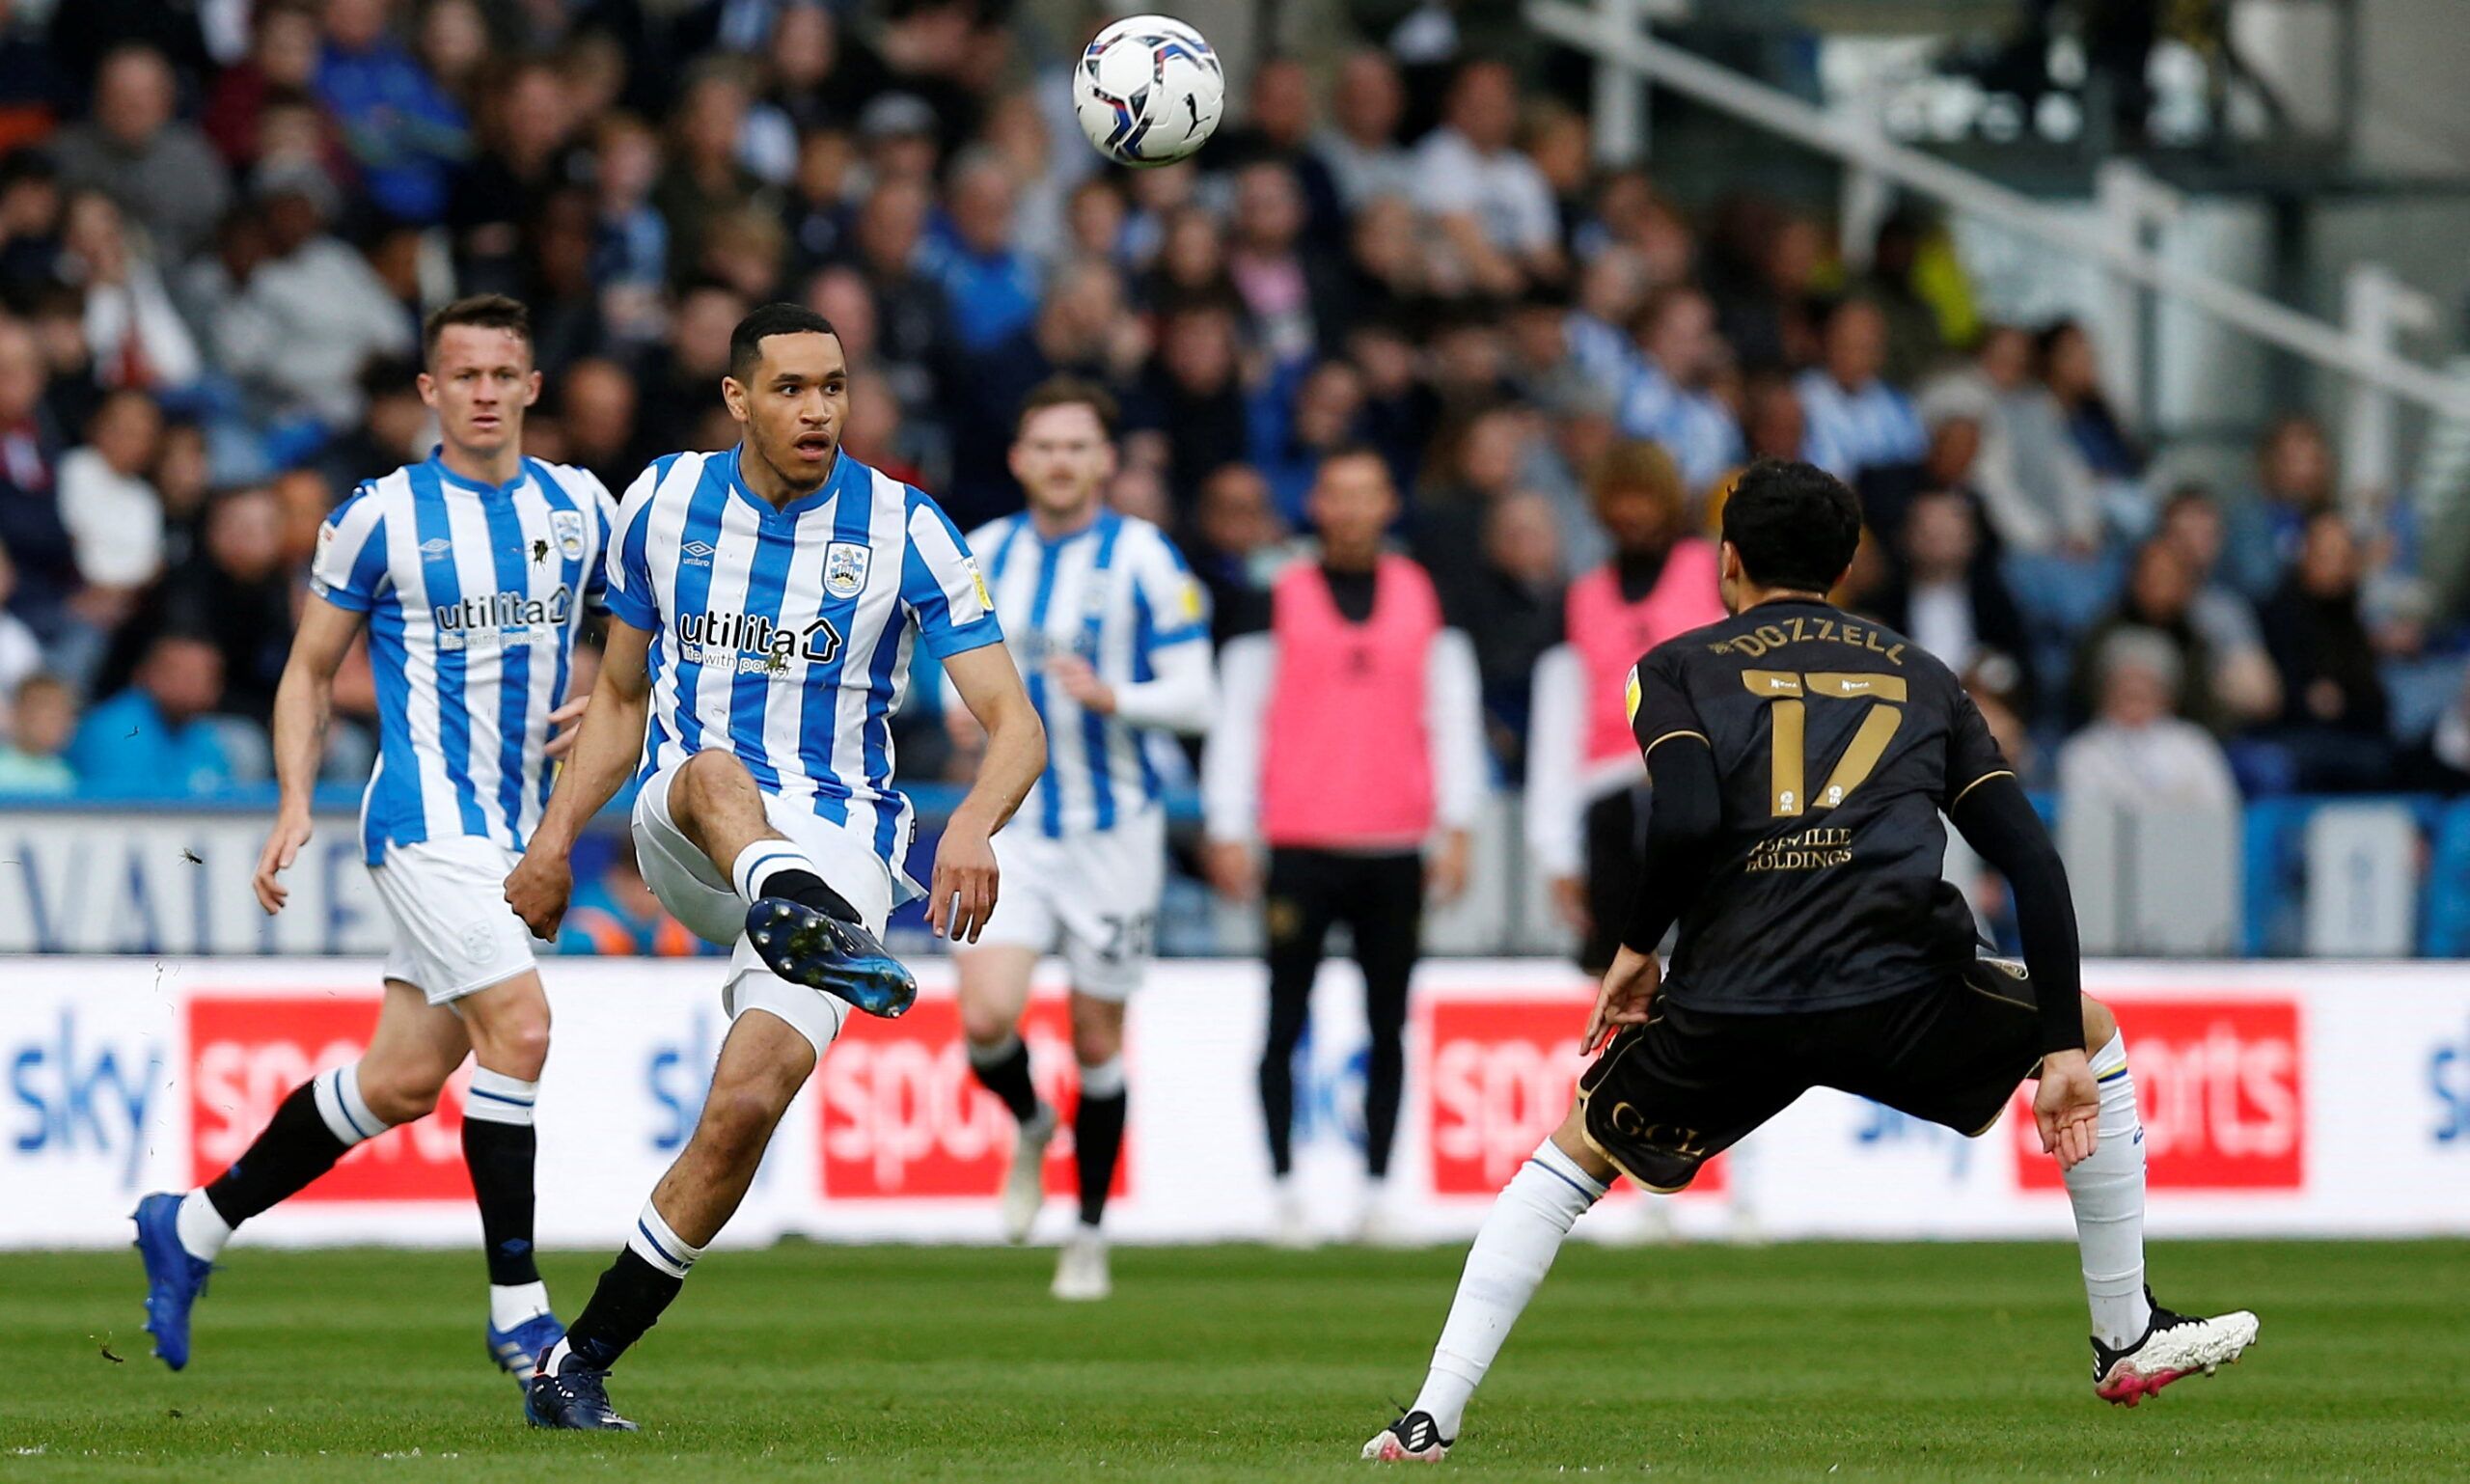 Soccer Football - Championship - Huddersfield Town v Queens Park Rangers - John Smith's Stadium, Huddersfield, Britain - April 15, 2022 Huddersfield Town's Jon Russell in action  Action Images/Craig Brough  EDITORIAL USE ONLY. No use with unauthorized audio, video, data, fixture lists, club/league logos or 